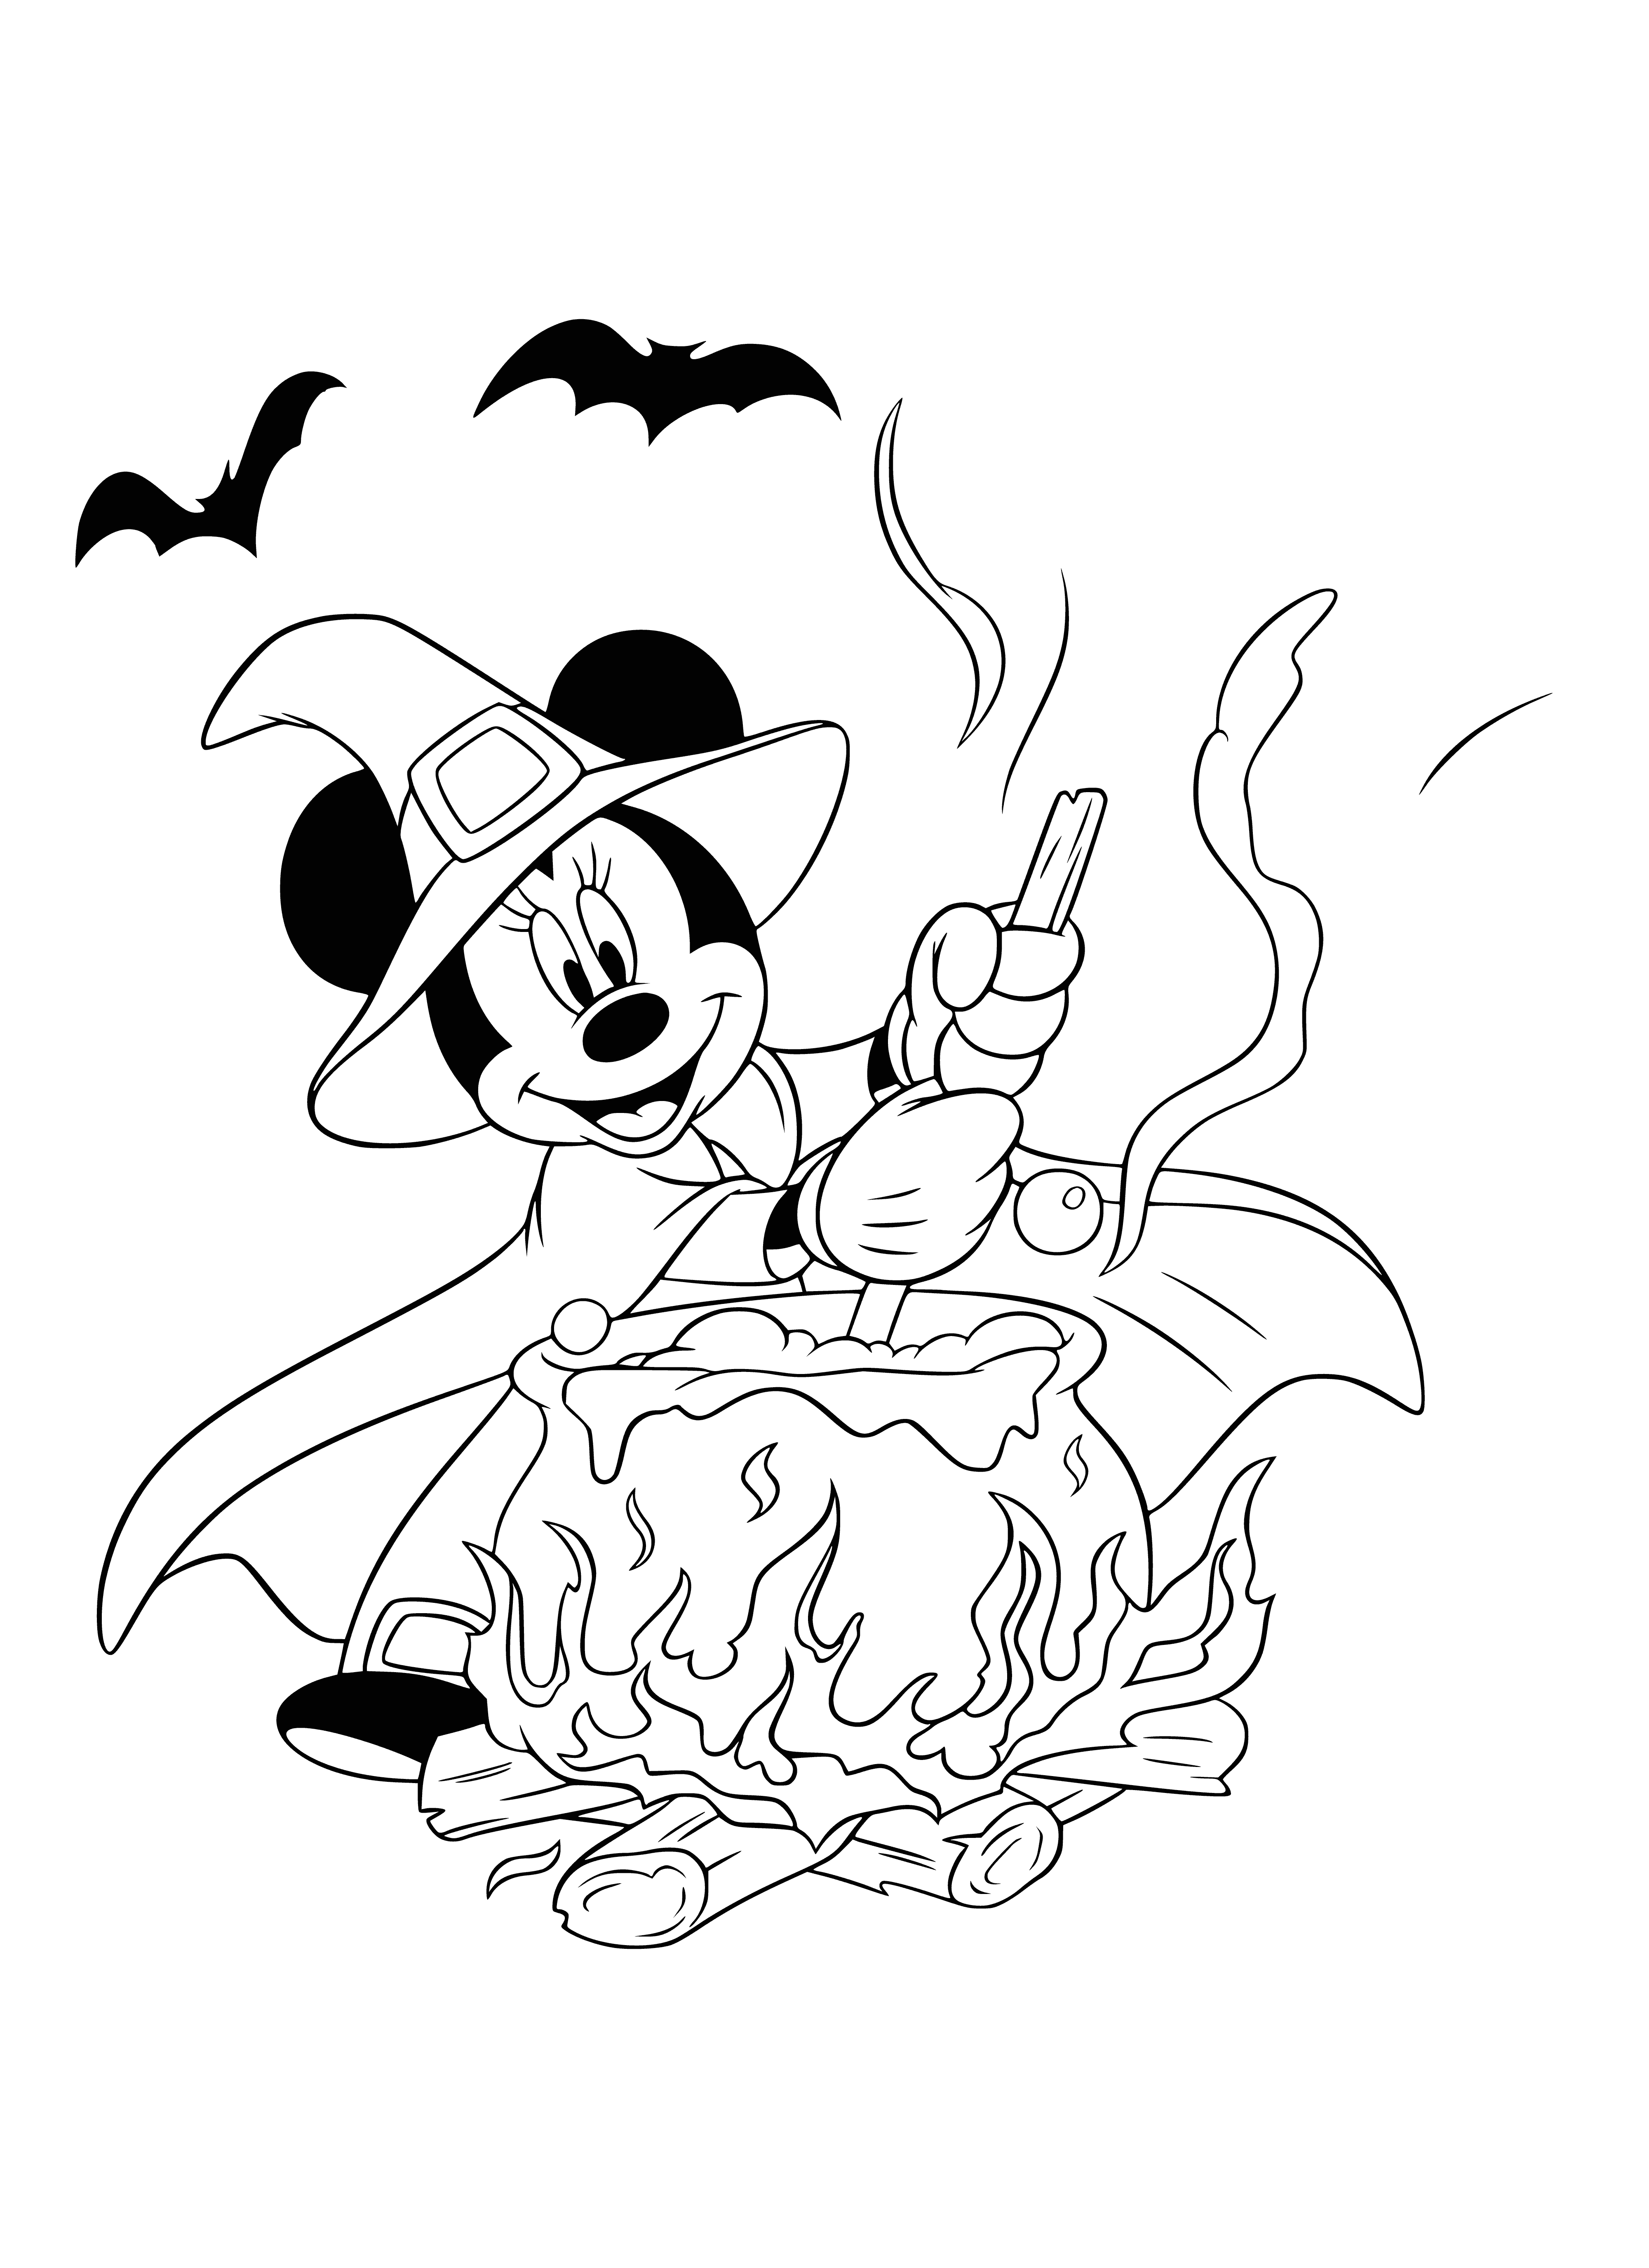 Minnie Mouse brews a potion coloring page